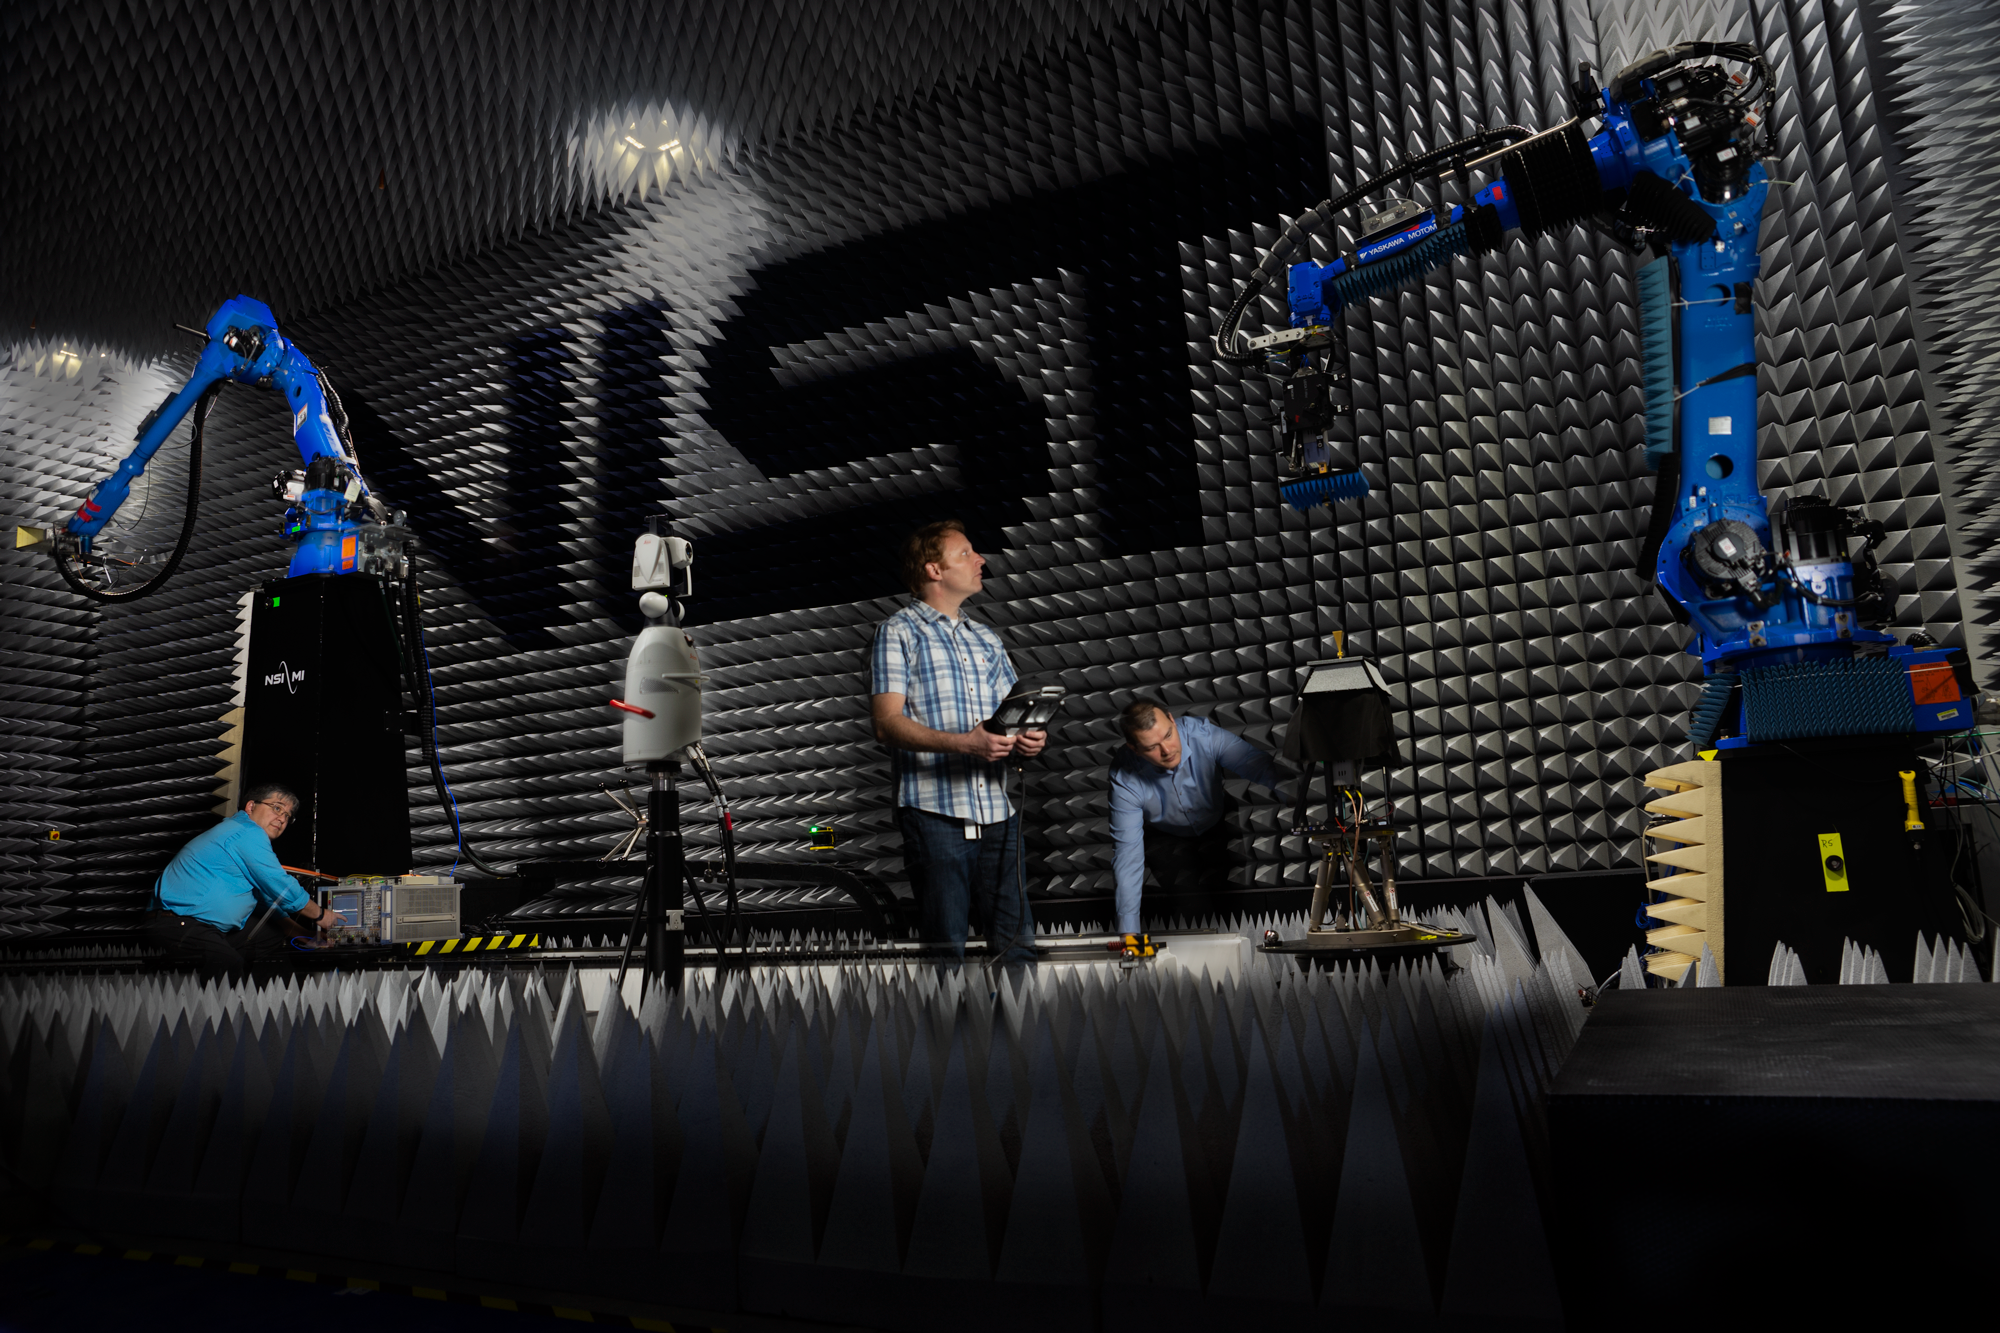 NIST Helps Build Accurate Measurement Infrastructure for 5G Communications